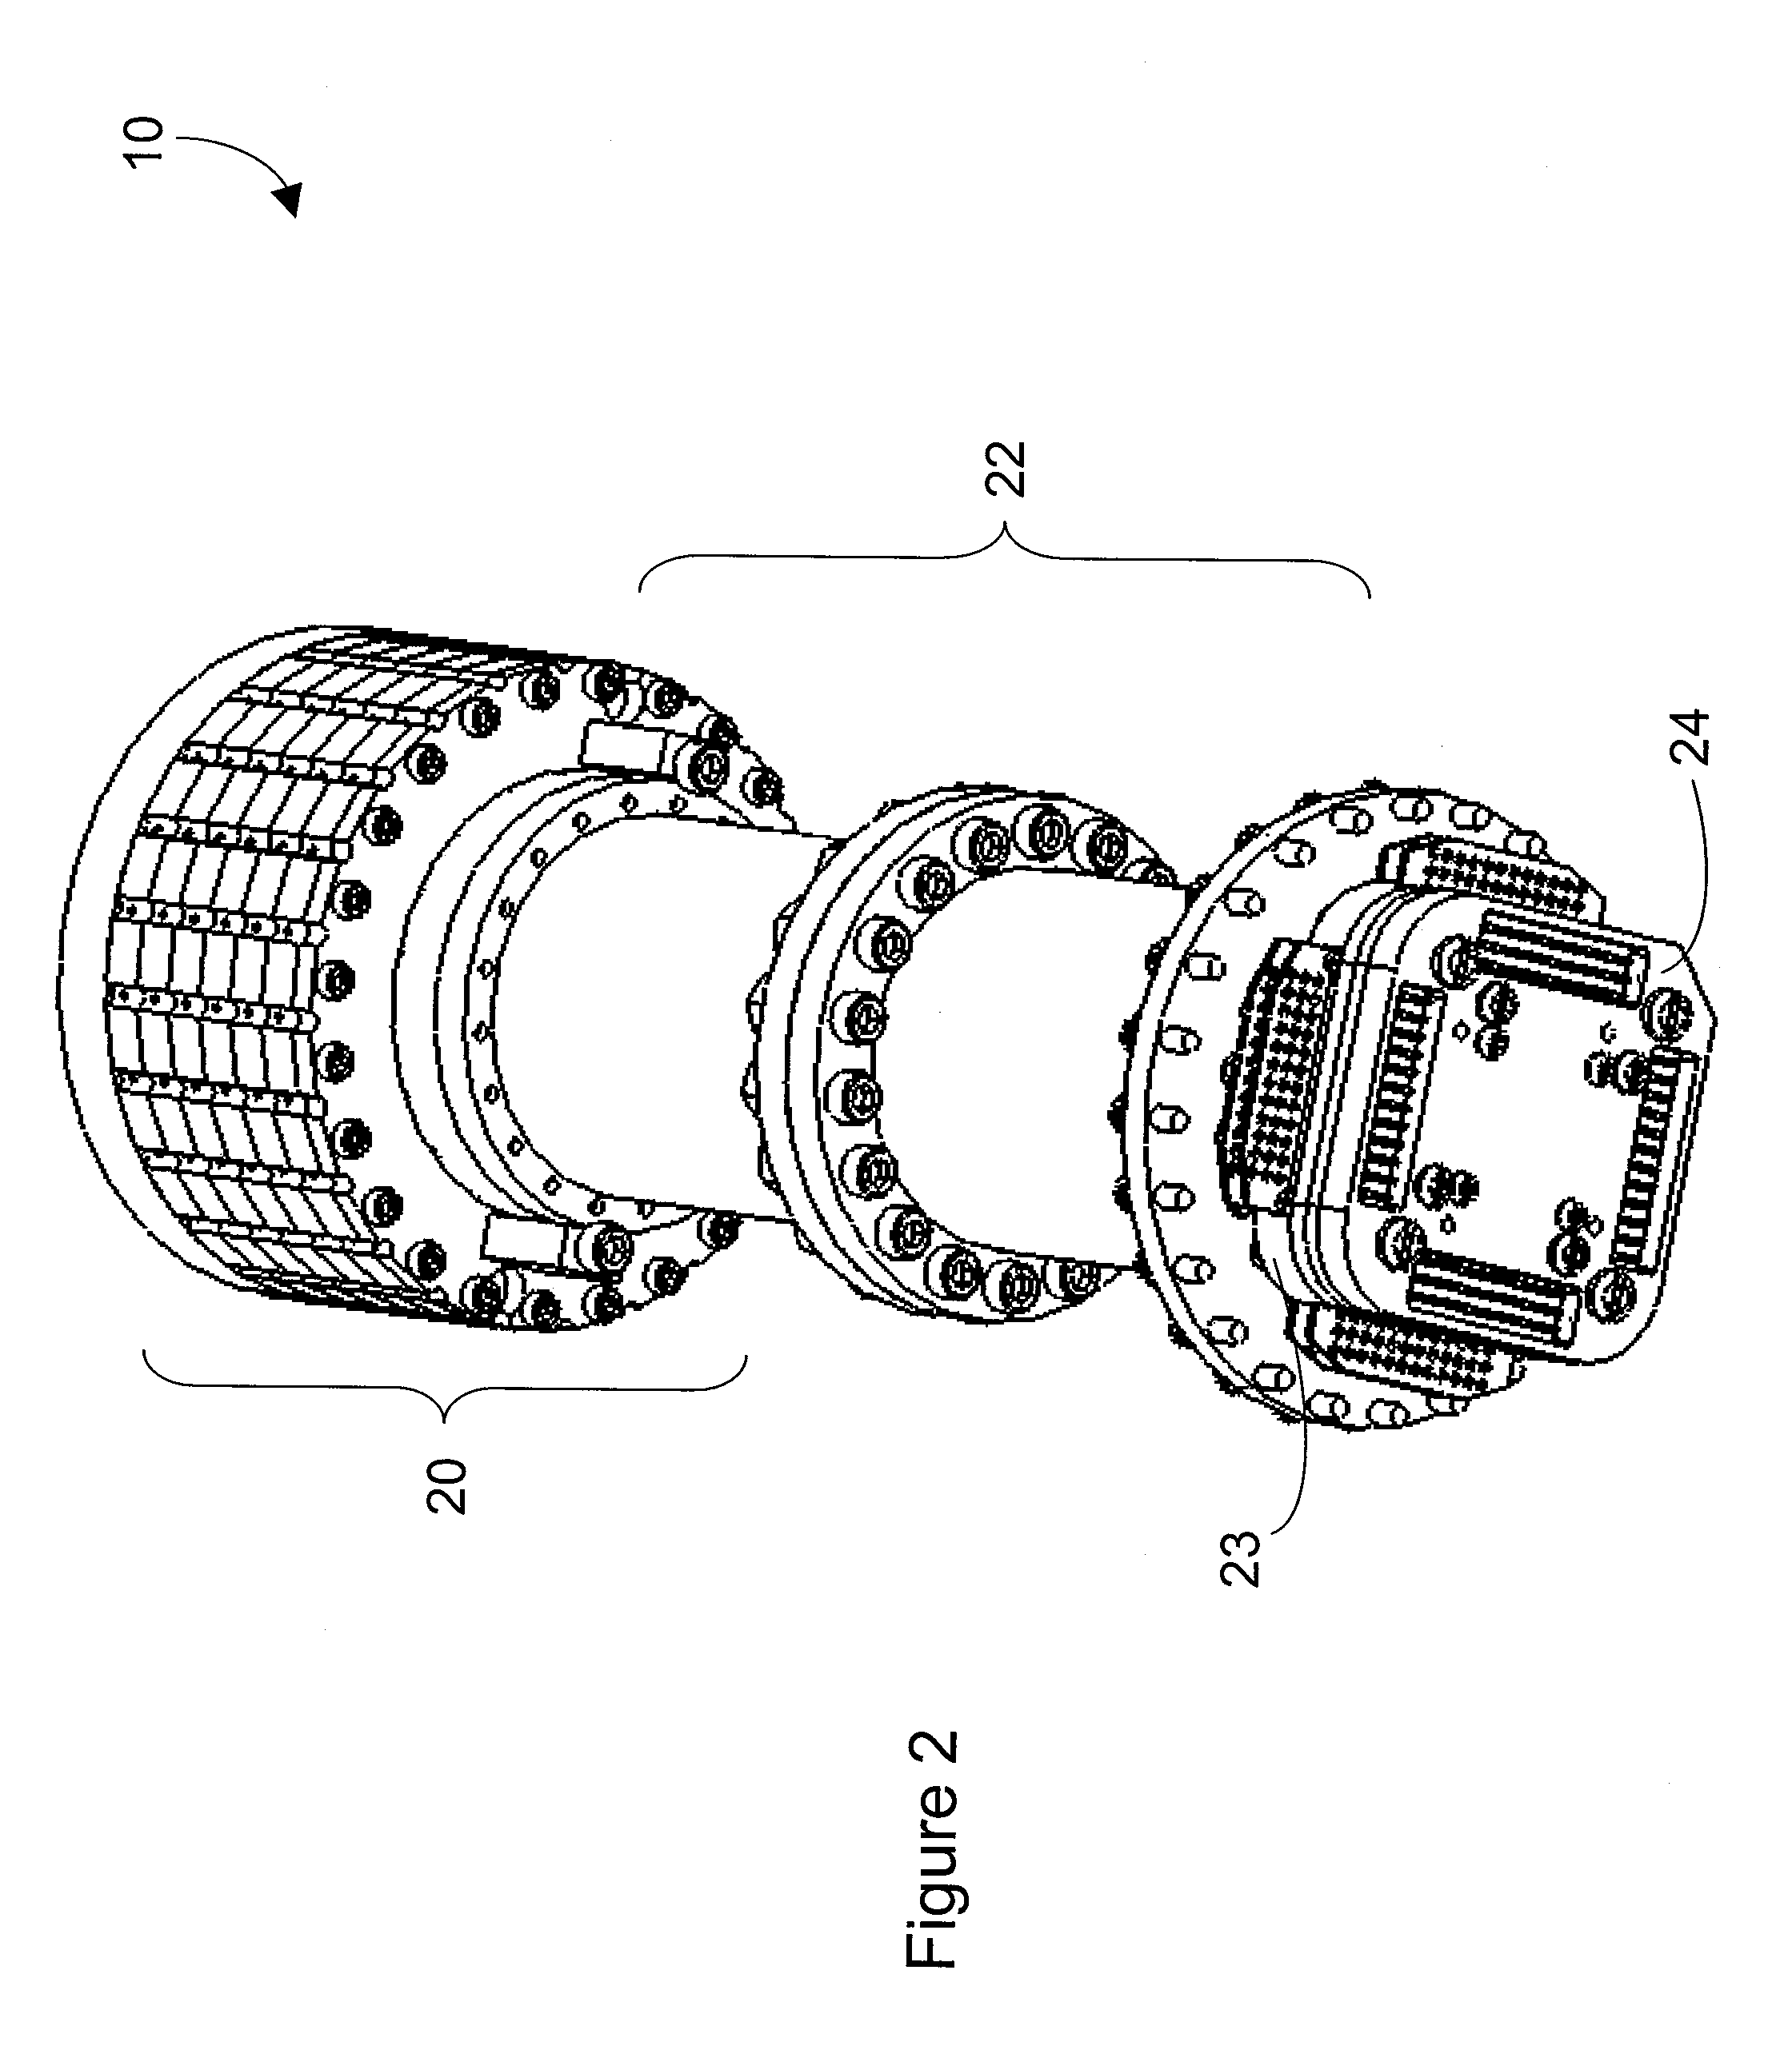 Input/output system and devices for use with superconducting devices